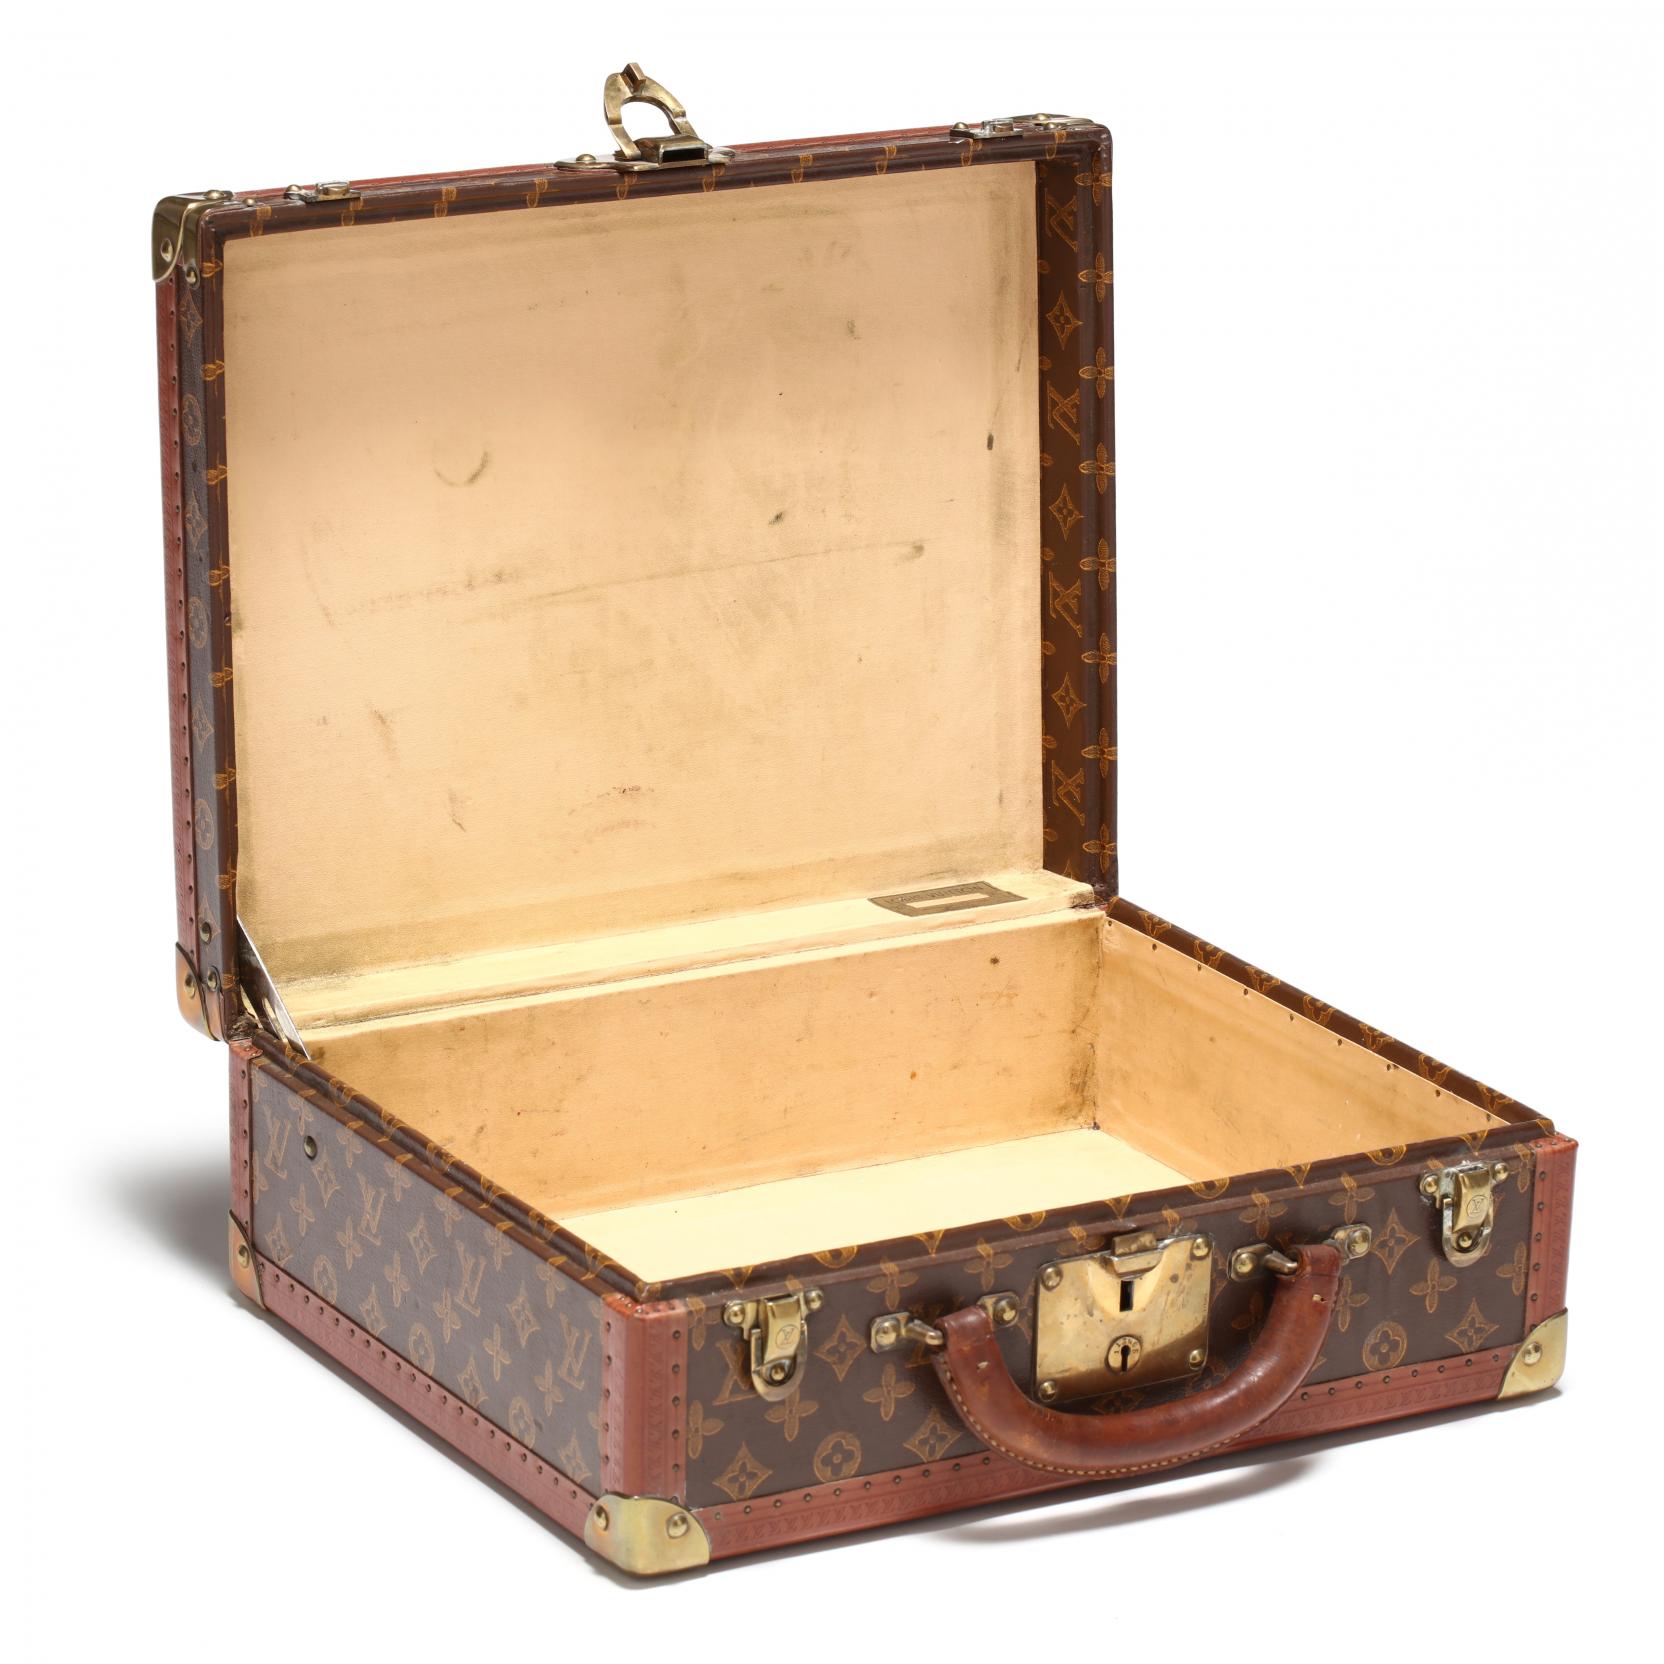 Vintage Small Suitcase, Cotteville 40, Louis Vuitton (Lot 122 - The Fall  Quarterly Auction featuring The Collection of Esther B. Ferguson,  Secessionville Manor, SCSep 16, 2017, 10:00am)